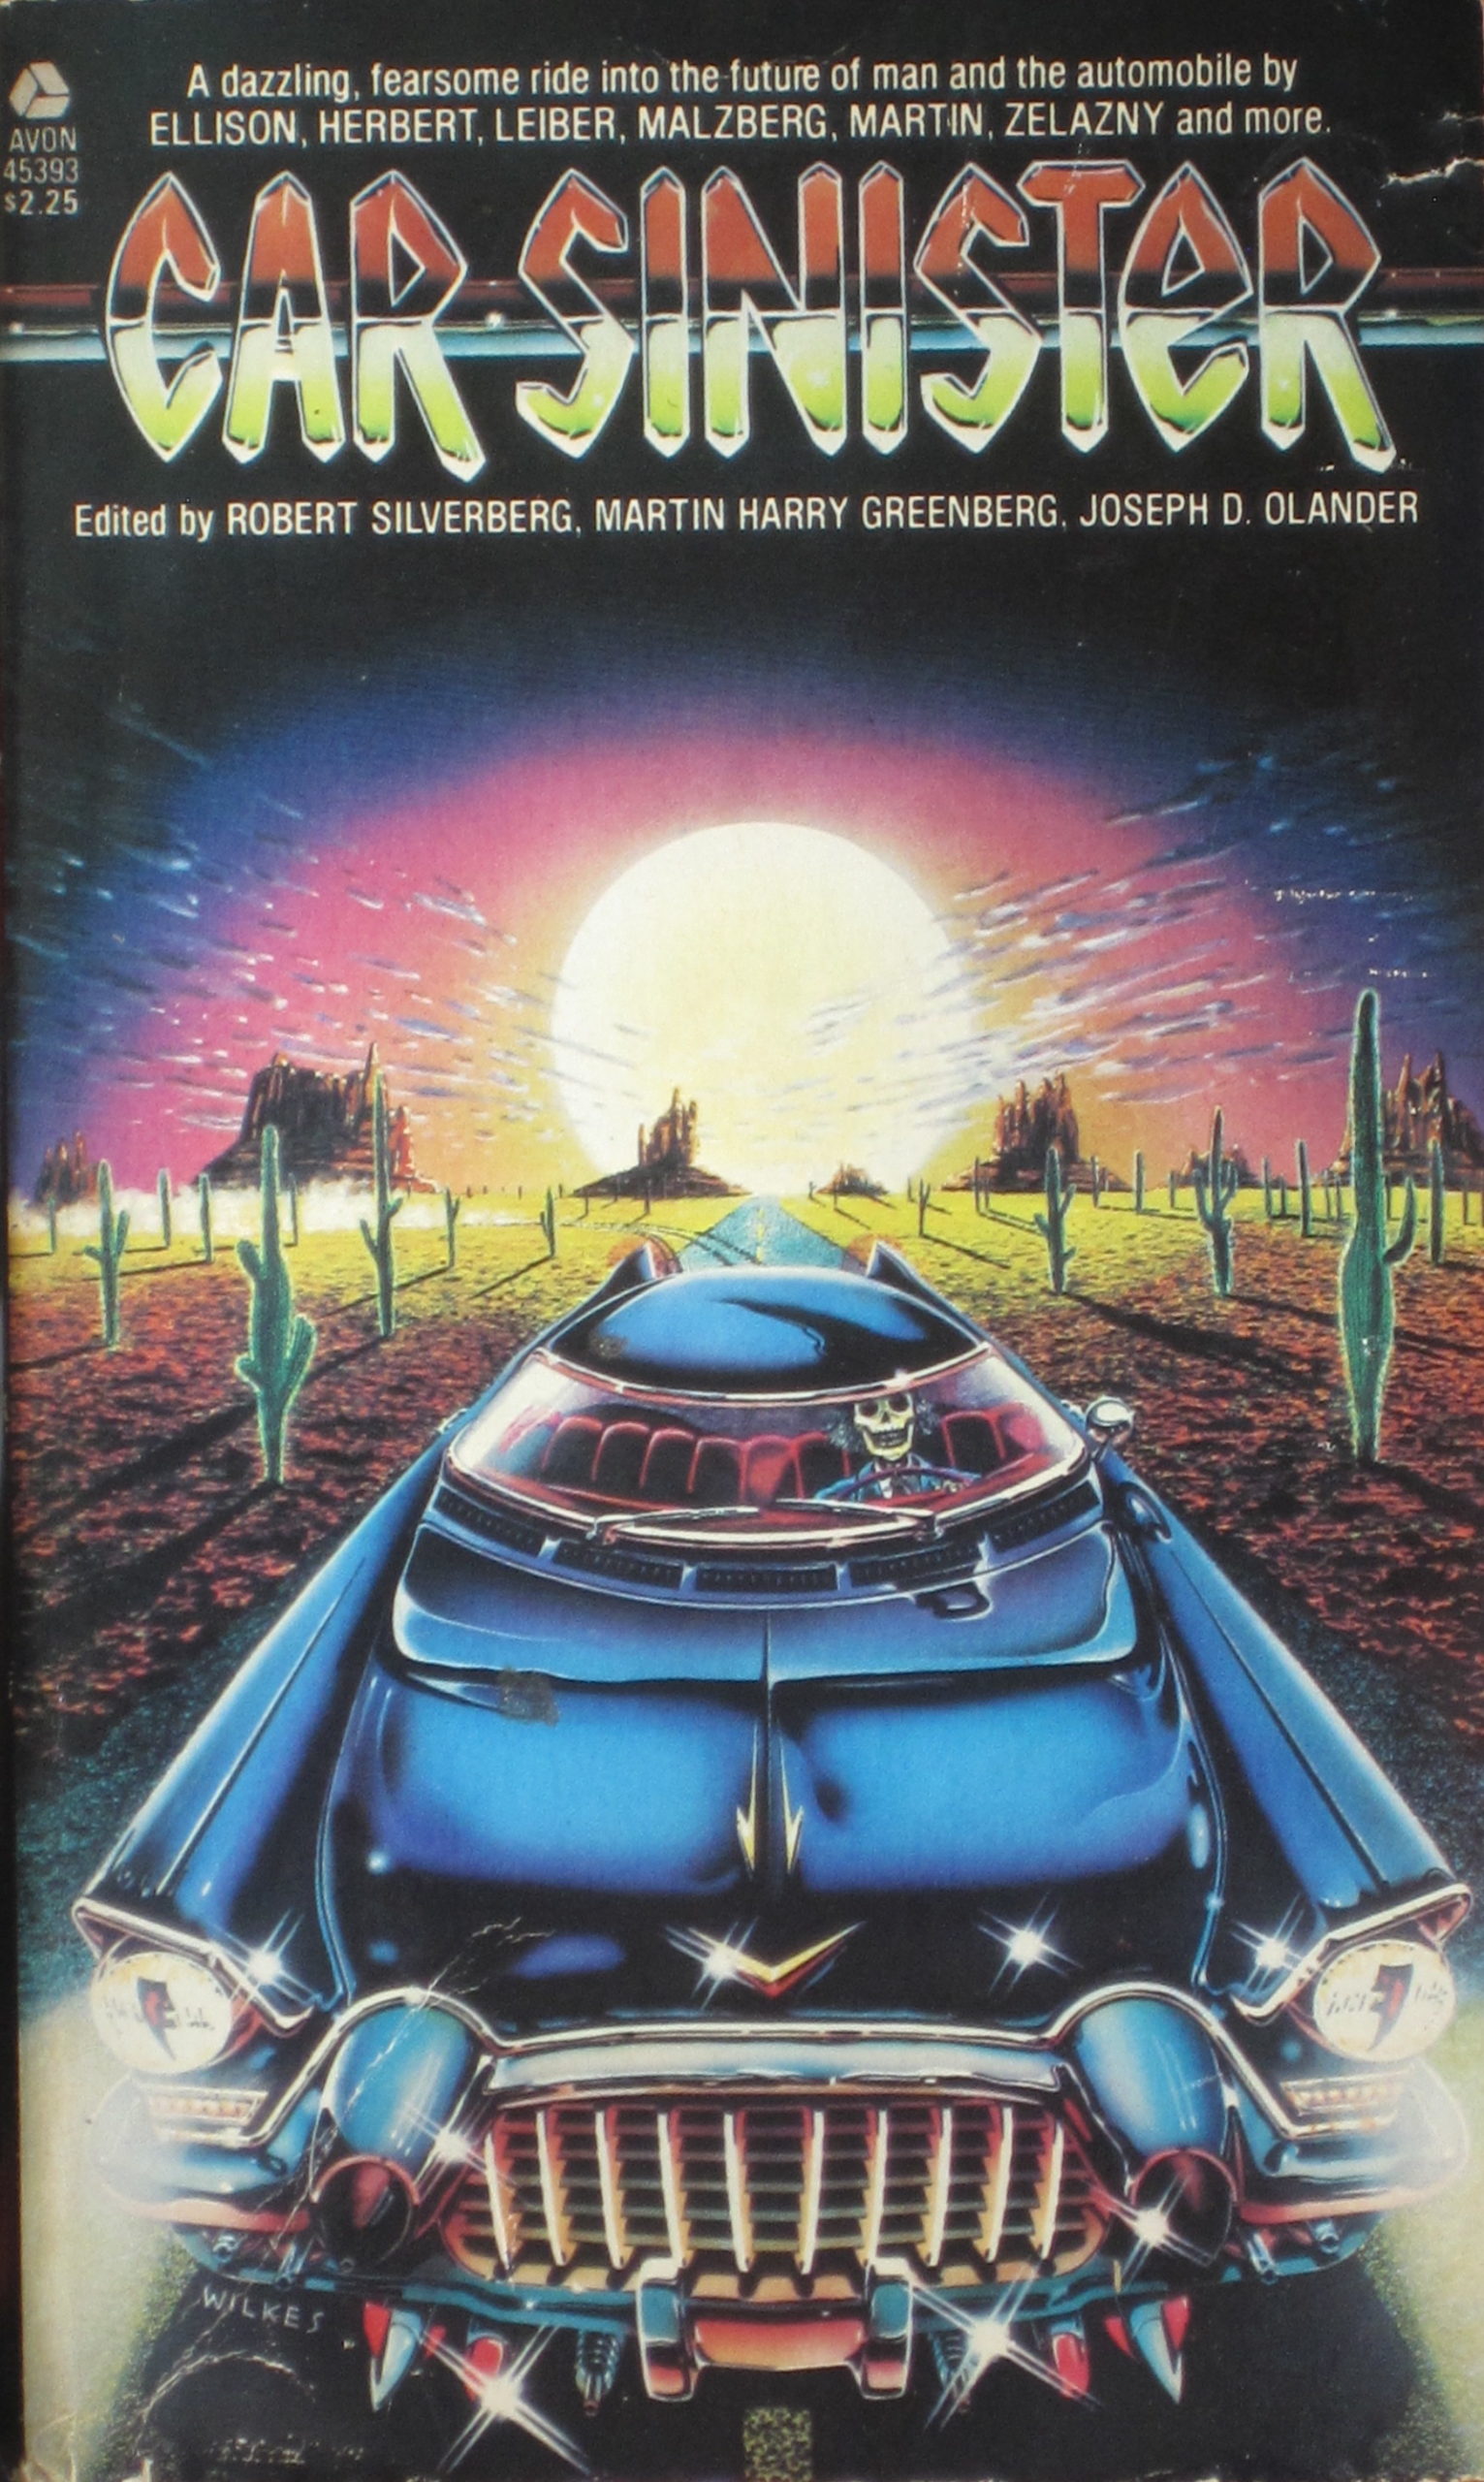 Book Review: Car Sinister - A Science Fiction Anthology